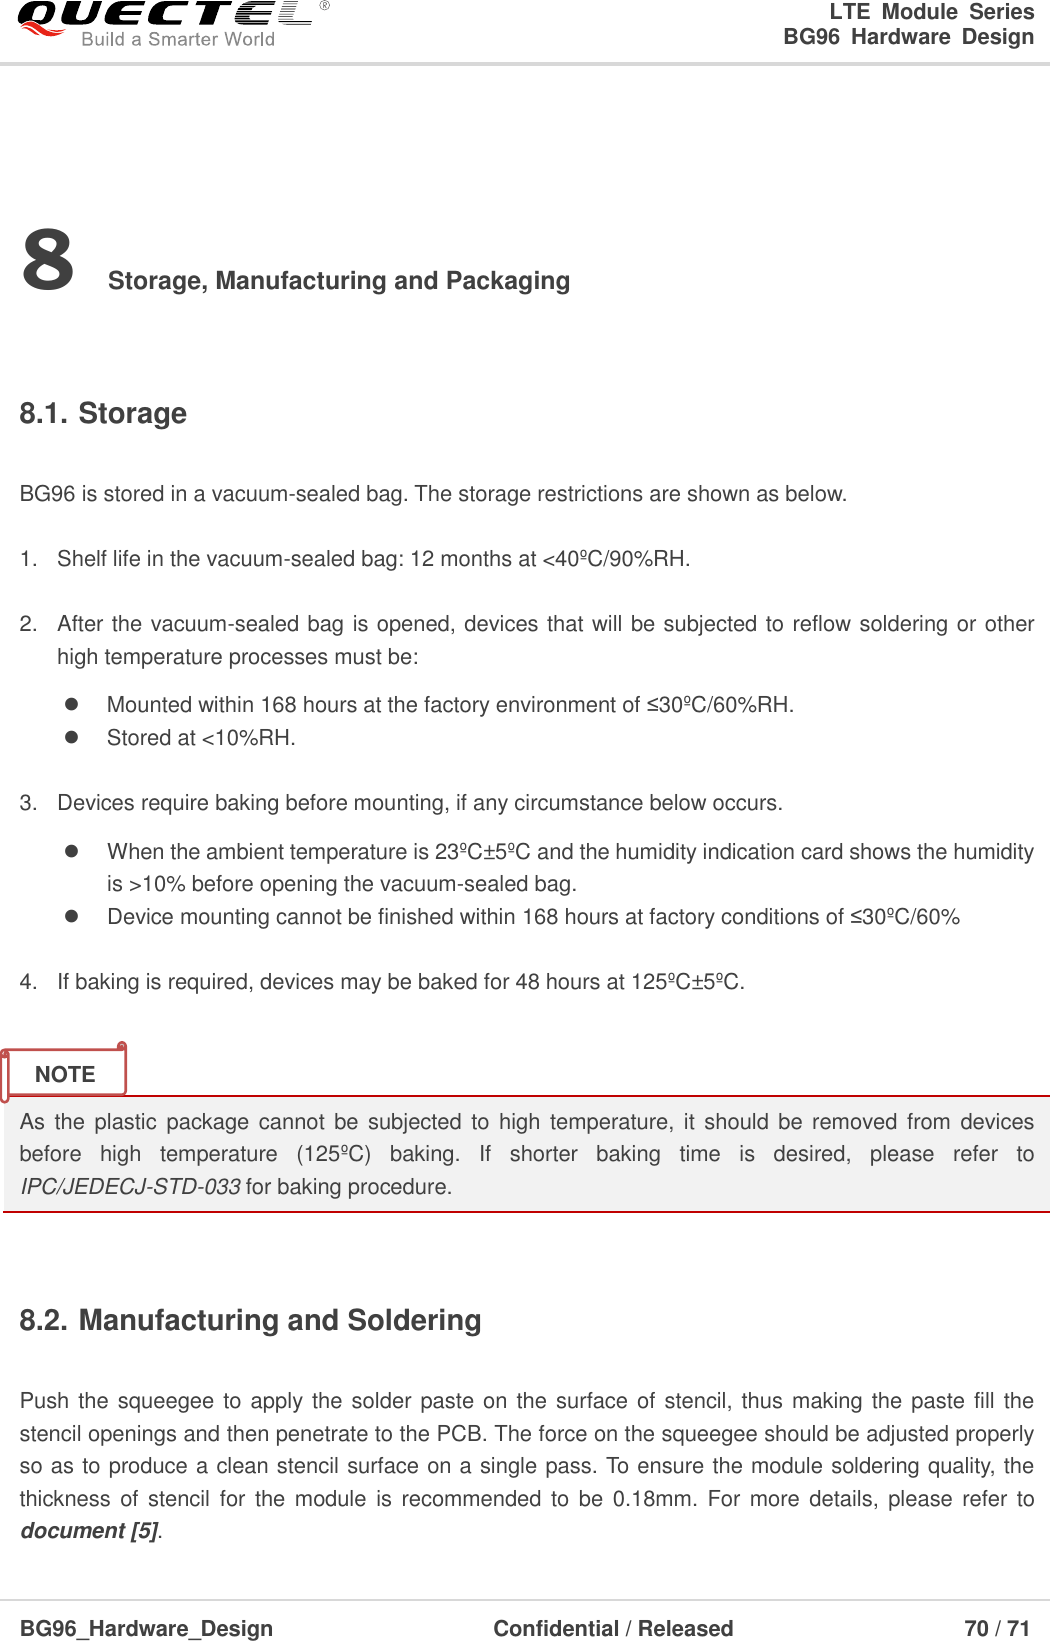 LTE  Module  Series                                                  BG96  Hardware  Design  BG96_Hardware_Design                              Confidential / Released                             70 / 71    8 Storage, Manufacturing and Packaging  8.1. Storage  BG96 is stored in a vacuum-sealed bag. The storage restrictions are shown as below.    1.  Shelf life in the vacuum-sealed bag: 12 months at &lt;40ºC/90%RH.  2.  After the vacuum-sealed bag is opened, devices that will be subjected to reflow soldering or other high temperature processes must be:     Mounted within 168 hours at the factory environment of ≤30ºC/60%RH.   Stored at &lt;10%RH.  3.  Devices require baking before mounting, if any circumstance below occurs.   When the ambient temperature is 23ºC±5ºC and the humidity indication card shows the humidity is &gt;10% before opening the vacuum-sealed bag.    Device mounting cannot be finished within 168 hours at factory conditions of ≤30ºC/60%  4.  If baking is required, devices may be baked for 48 hours at 125ºC±5ºC.   As  the  plastic package cannot be  subjected  to  high  temperature, it should be removed  from  devices before  high  temperature  (125ºC )  baking.  If  shorter  baking  time  is  desired,  please  refer  to IPC/JEDECJ-STD-033 for baking procedure.  8.2. Manufacturing and Soldering  Push the squeegee to apply the solder paste on the surface of stencil, thus making the paste fill the stencil openings and then penetrate to the PCB. The force on the squeegee should be adjusted properly so as to produce a clean stencil surface on a single pass. To ensure the module soldering quality, the thickness of stencil for  the module is recommended to be  0.18mm. For more  details,  please  refer  to document [5]. NOTE 